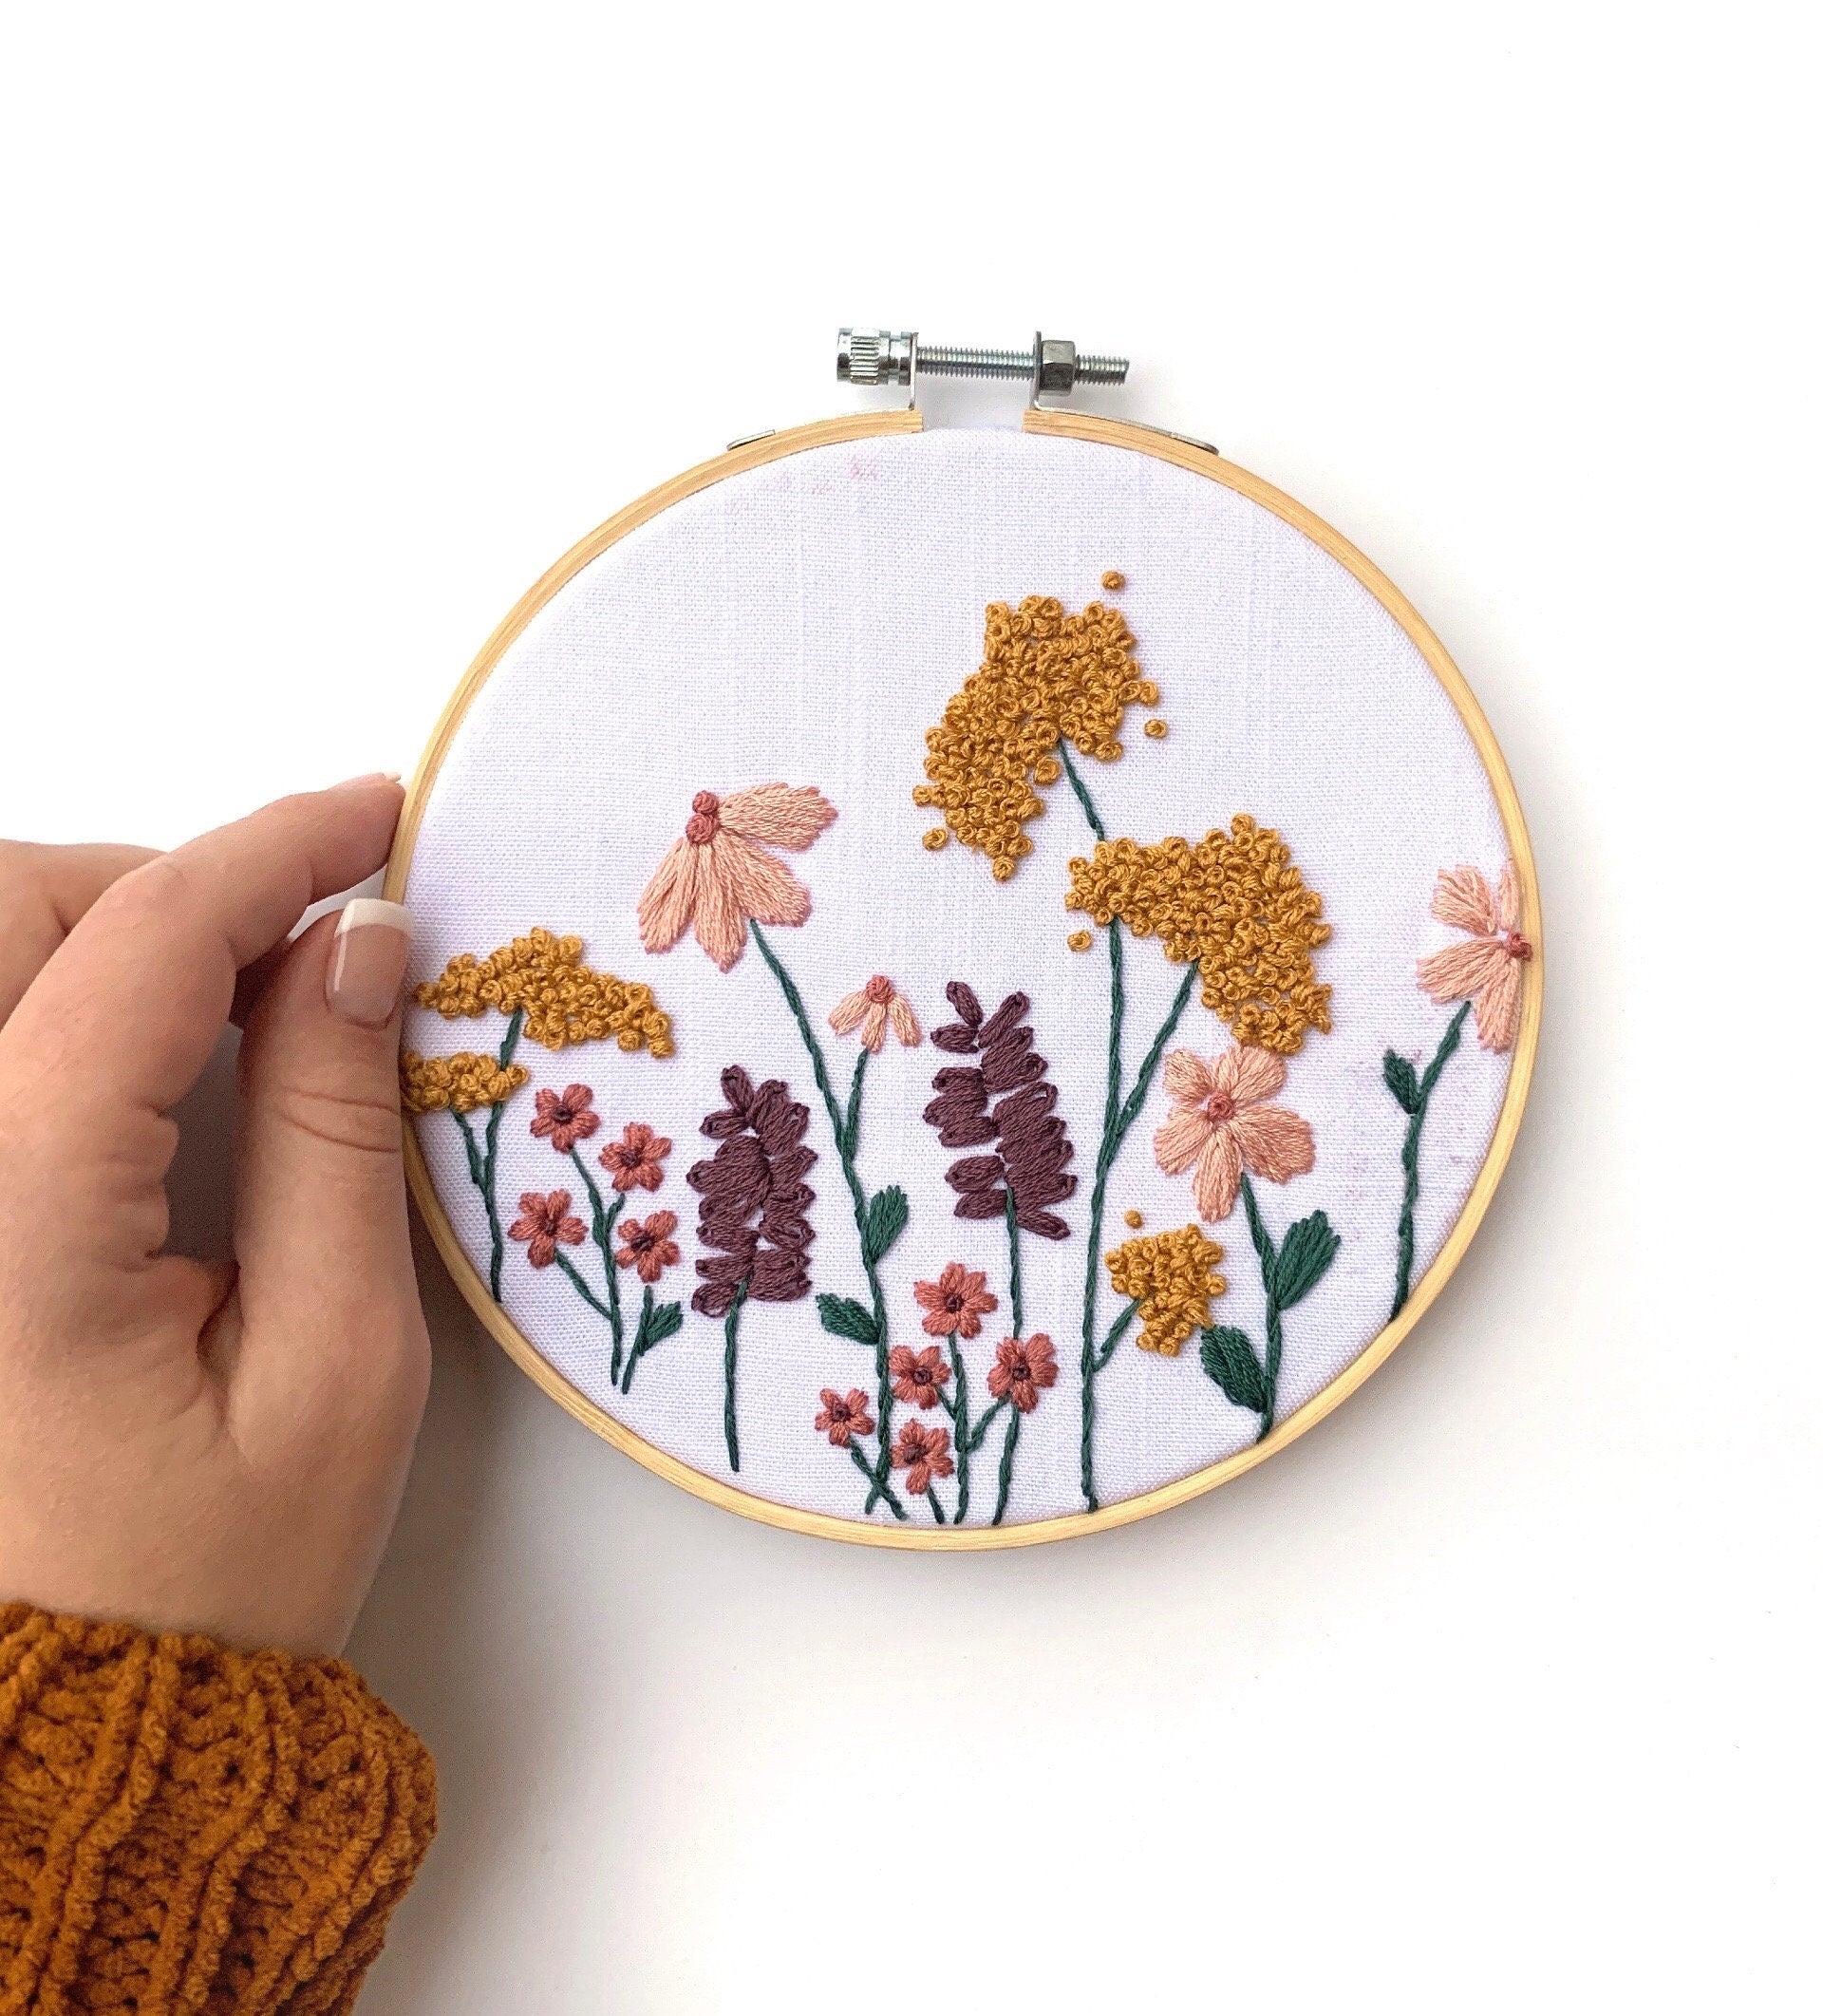 25 Easy Embroidery Projects For Beginners With Free Patterns  Embroidery  patterns free, Simple embroidery, Garden embroidery